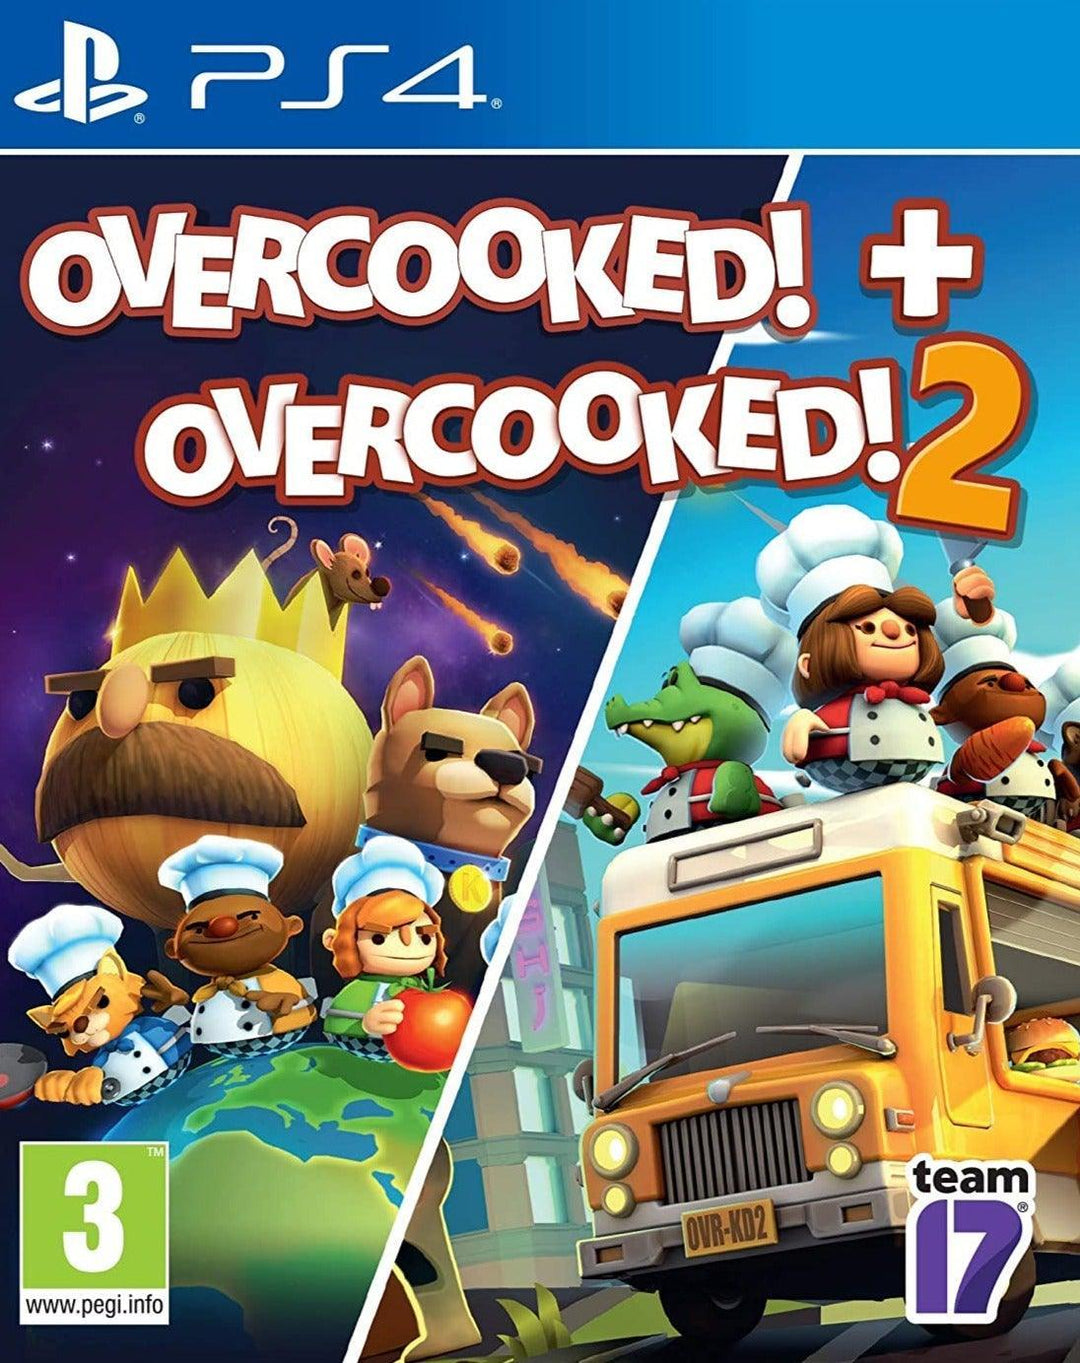 Overcooked! + Overcooked! 2 / PS4 / Playstation 4 - GD Games 